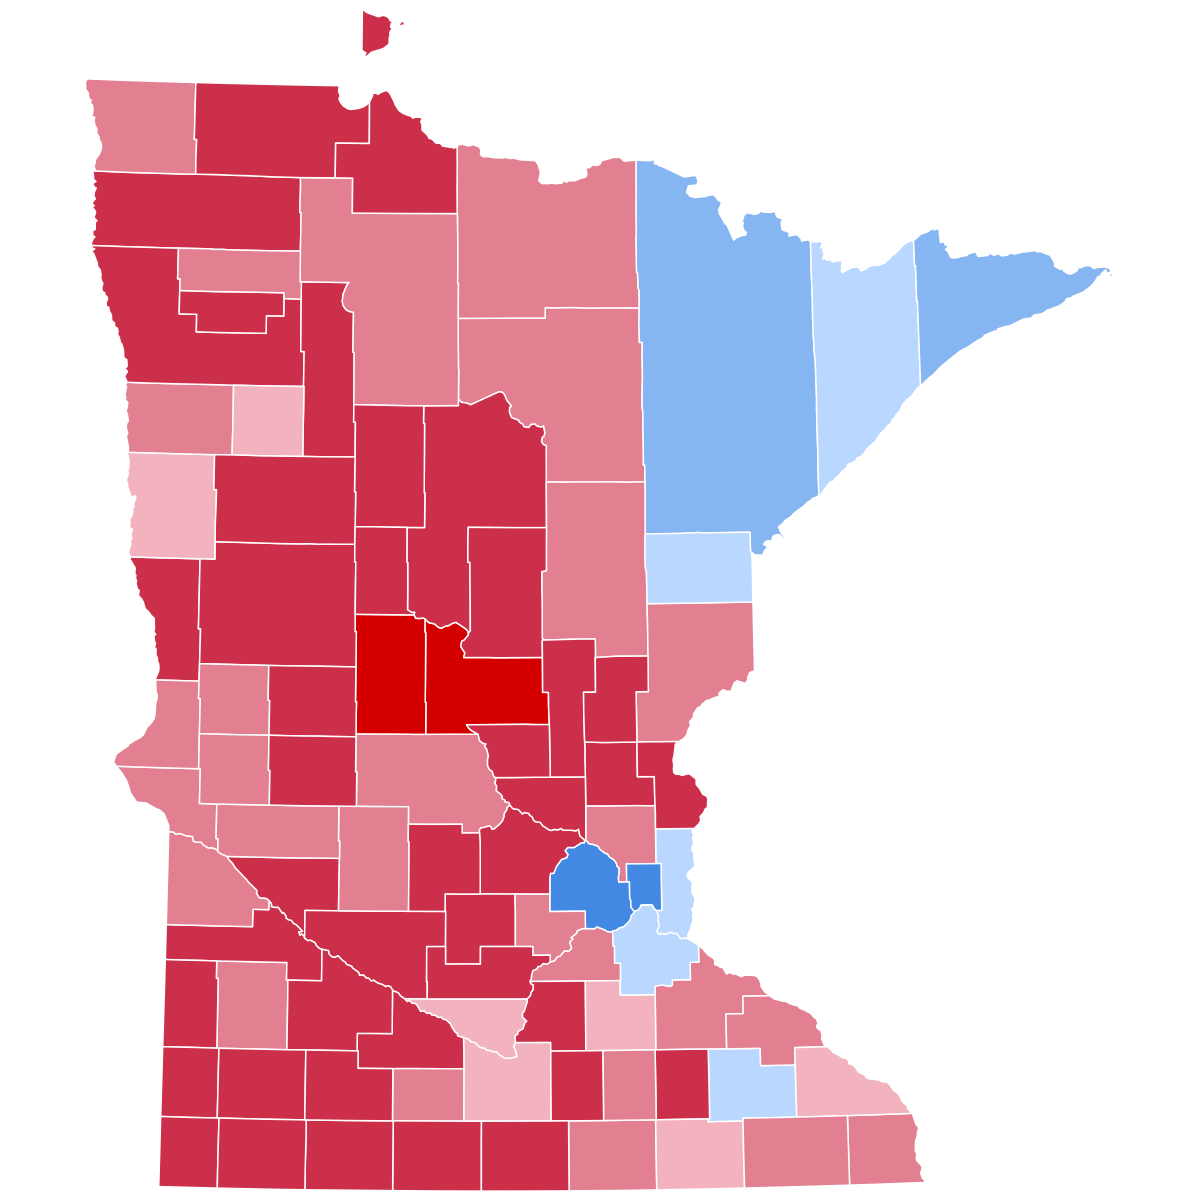 Results of the 2016 Republican Party presidential primaries - Wikipedia